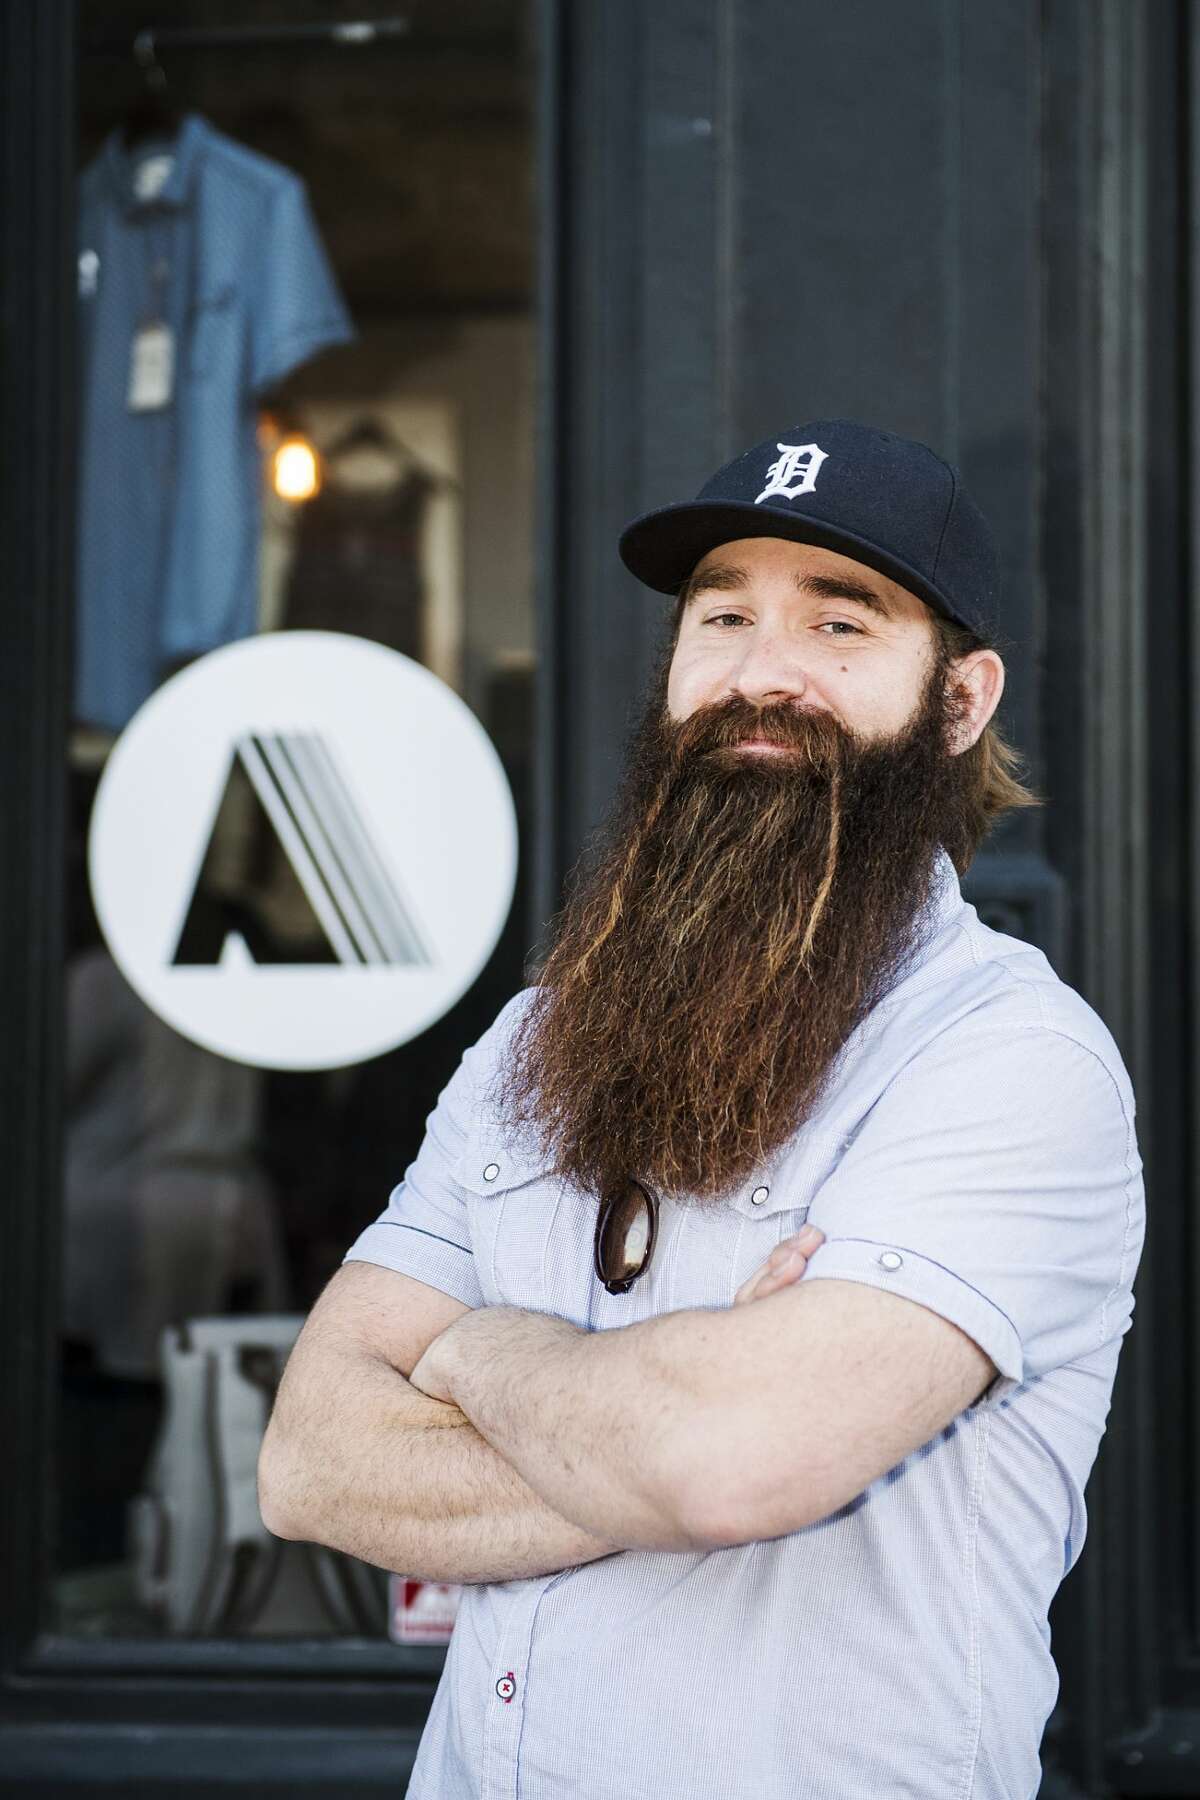 Scott Pawlak of Midland won the overall best beard during the second Battle of the Beards Thursday at Albert's General Store in Bay City. "My wife's been begging me to shave it, but that's not happening," Pawlak said of his beard.